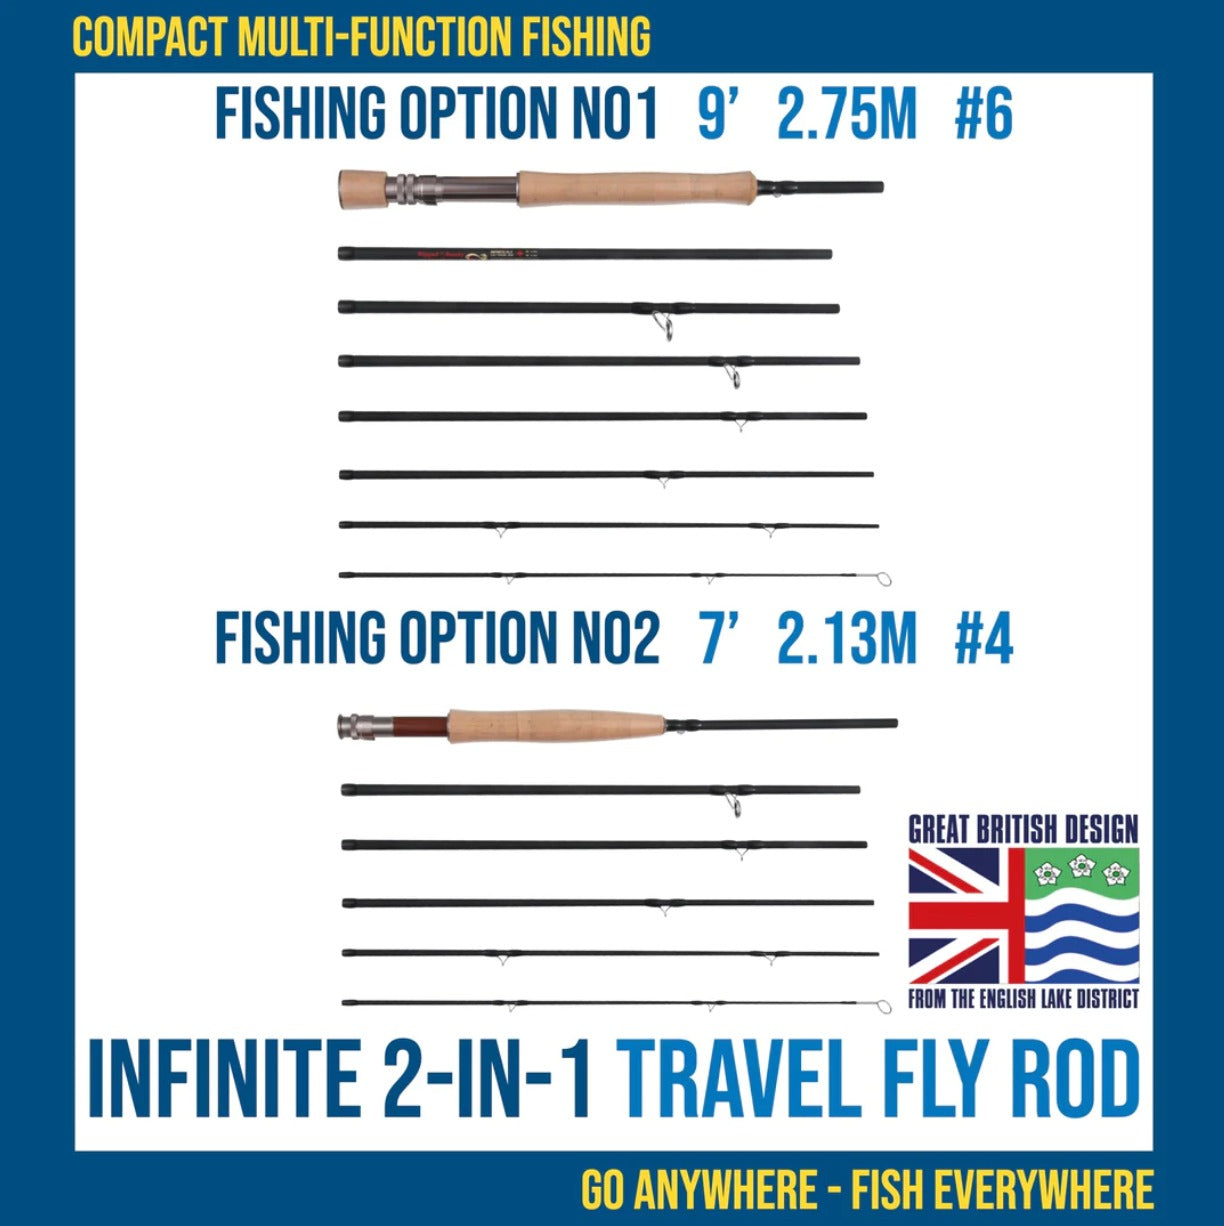 THE EXPERTS HAVE THEIR SAY ON OUR 2-IN-1 TRAVEL FLY FISHING ROD